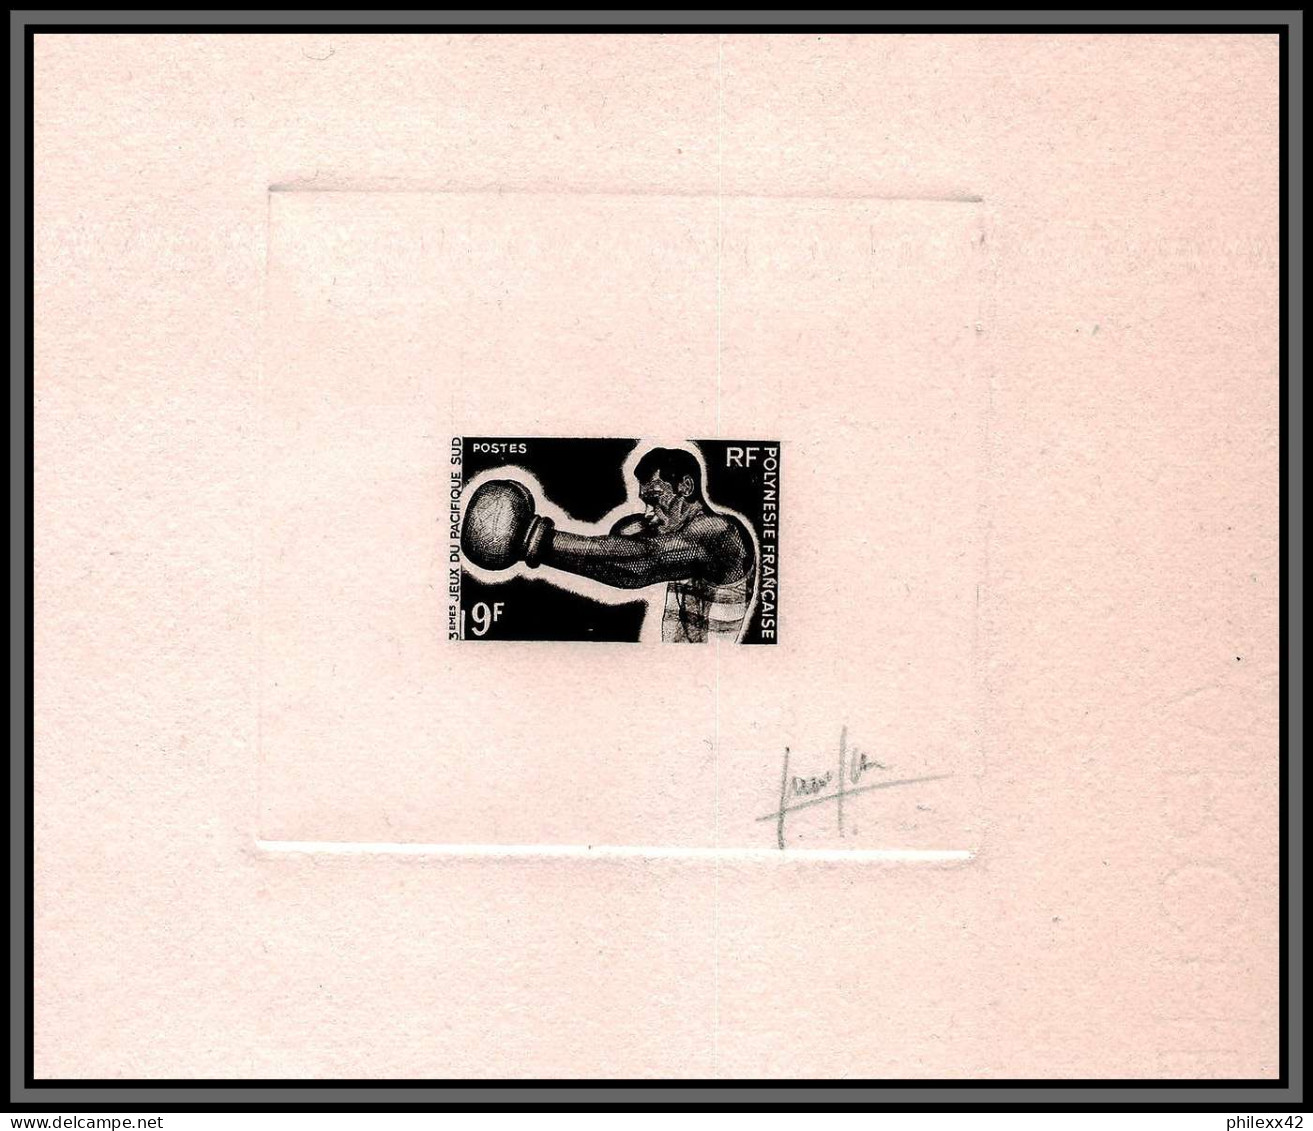 268/ Epreuve D'artiste Artist Proof Polynesie (Polynesia) Y&t 66 Boxe (boxing) Signé Signed - Imperforates, Proofs & Errors